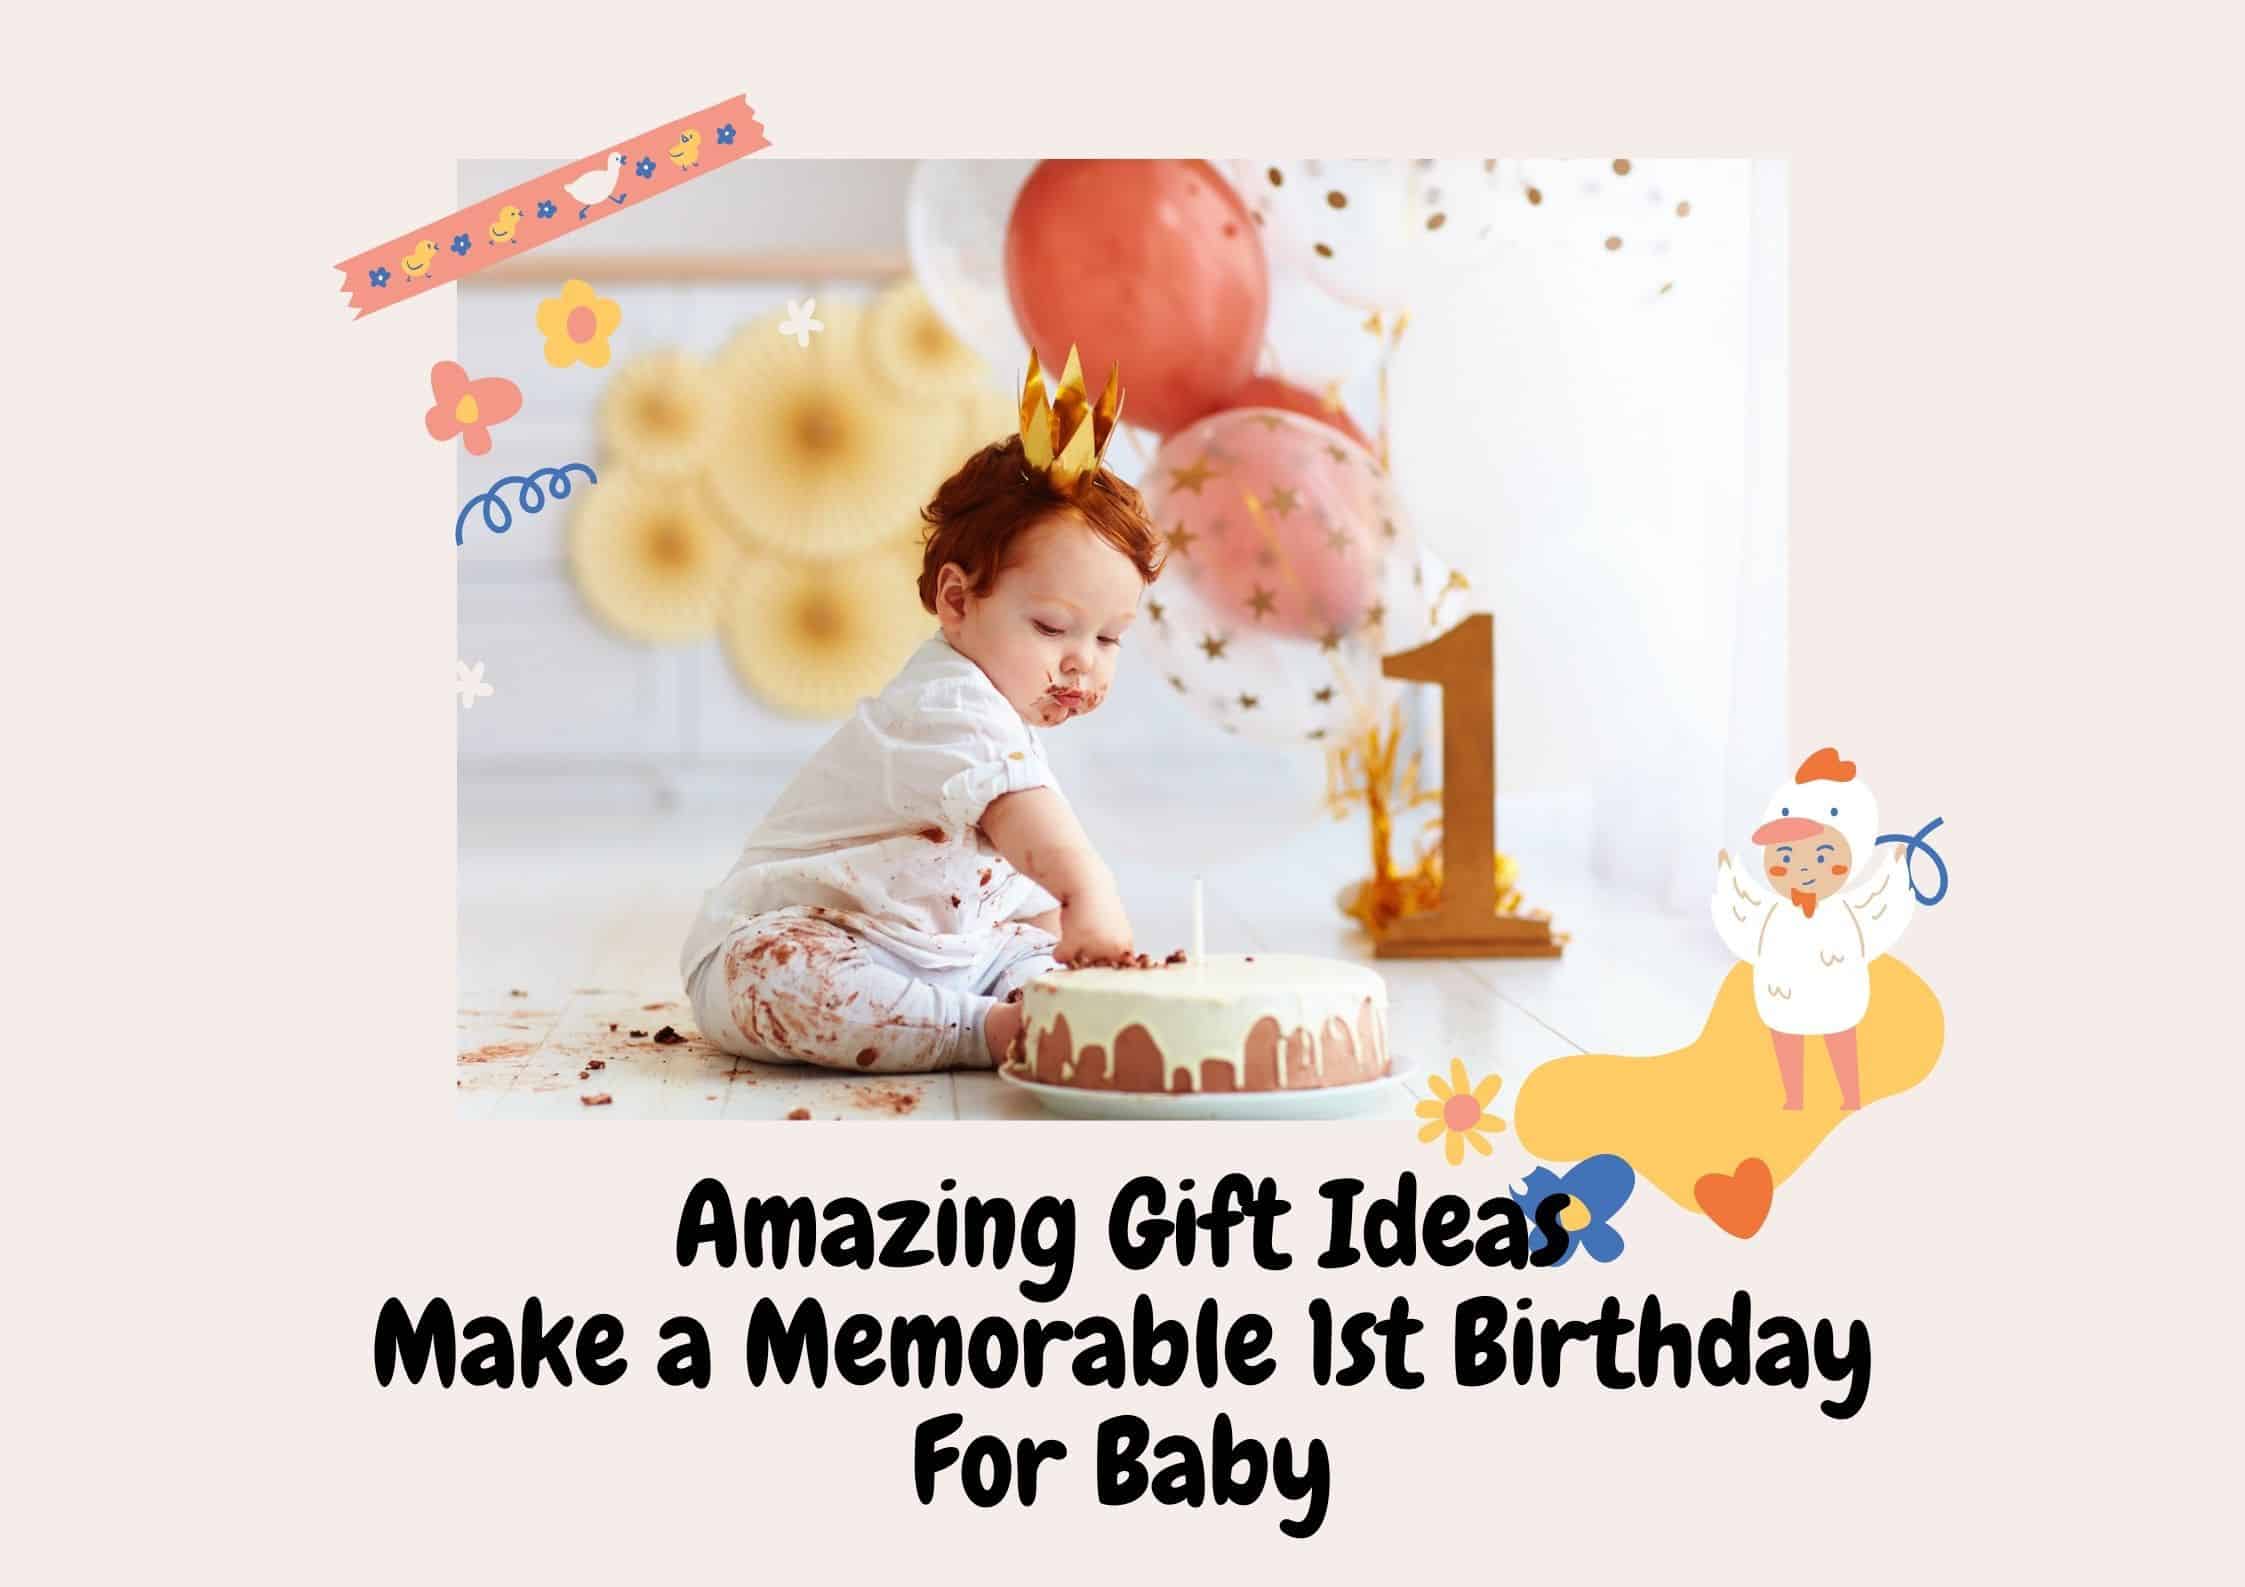 25+ Meaningful Gift Ideas to Make a Memorable First Birthday For Baby (2023)